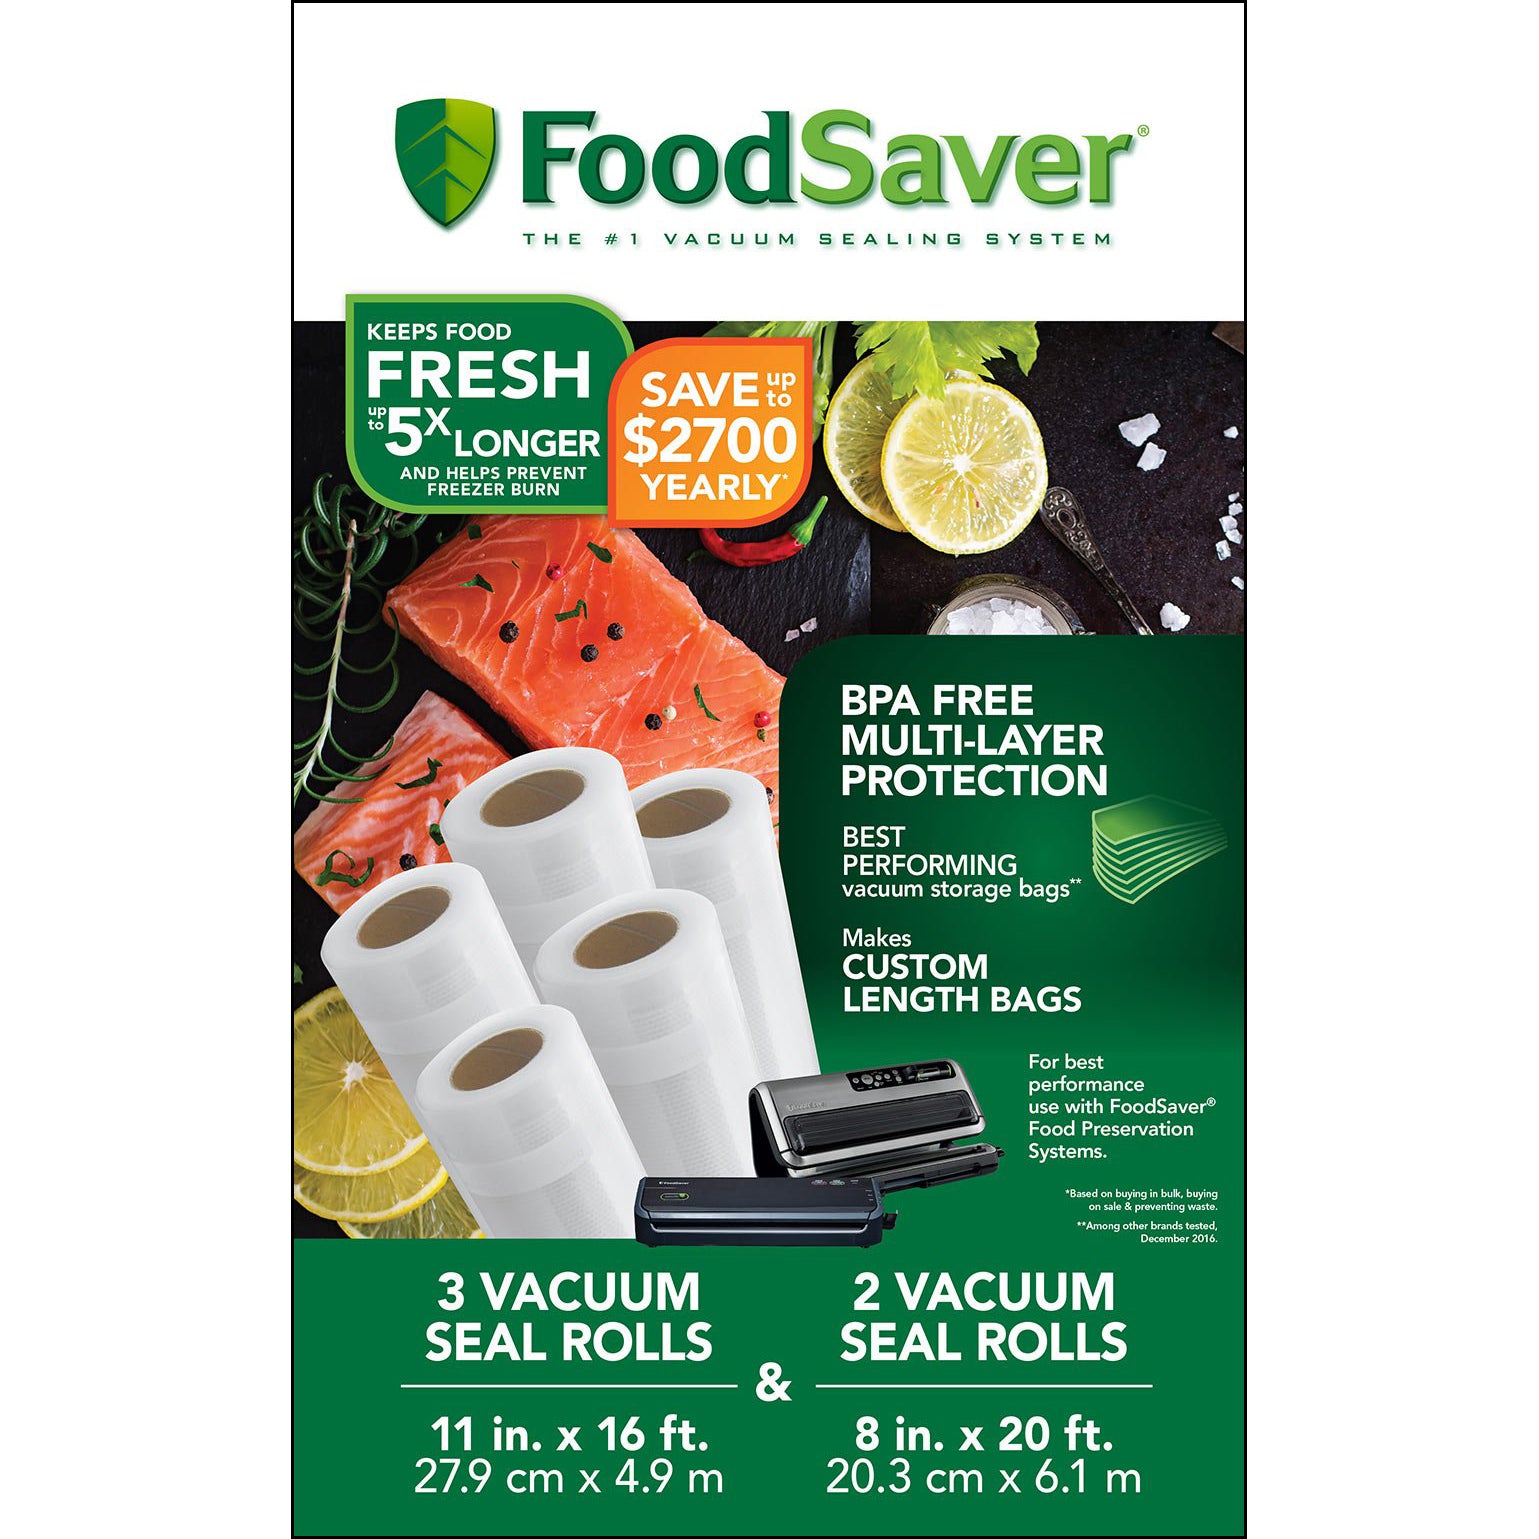 Foodsaver rolls - The Electric Brewery